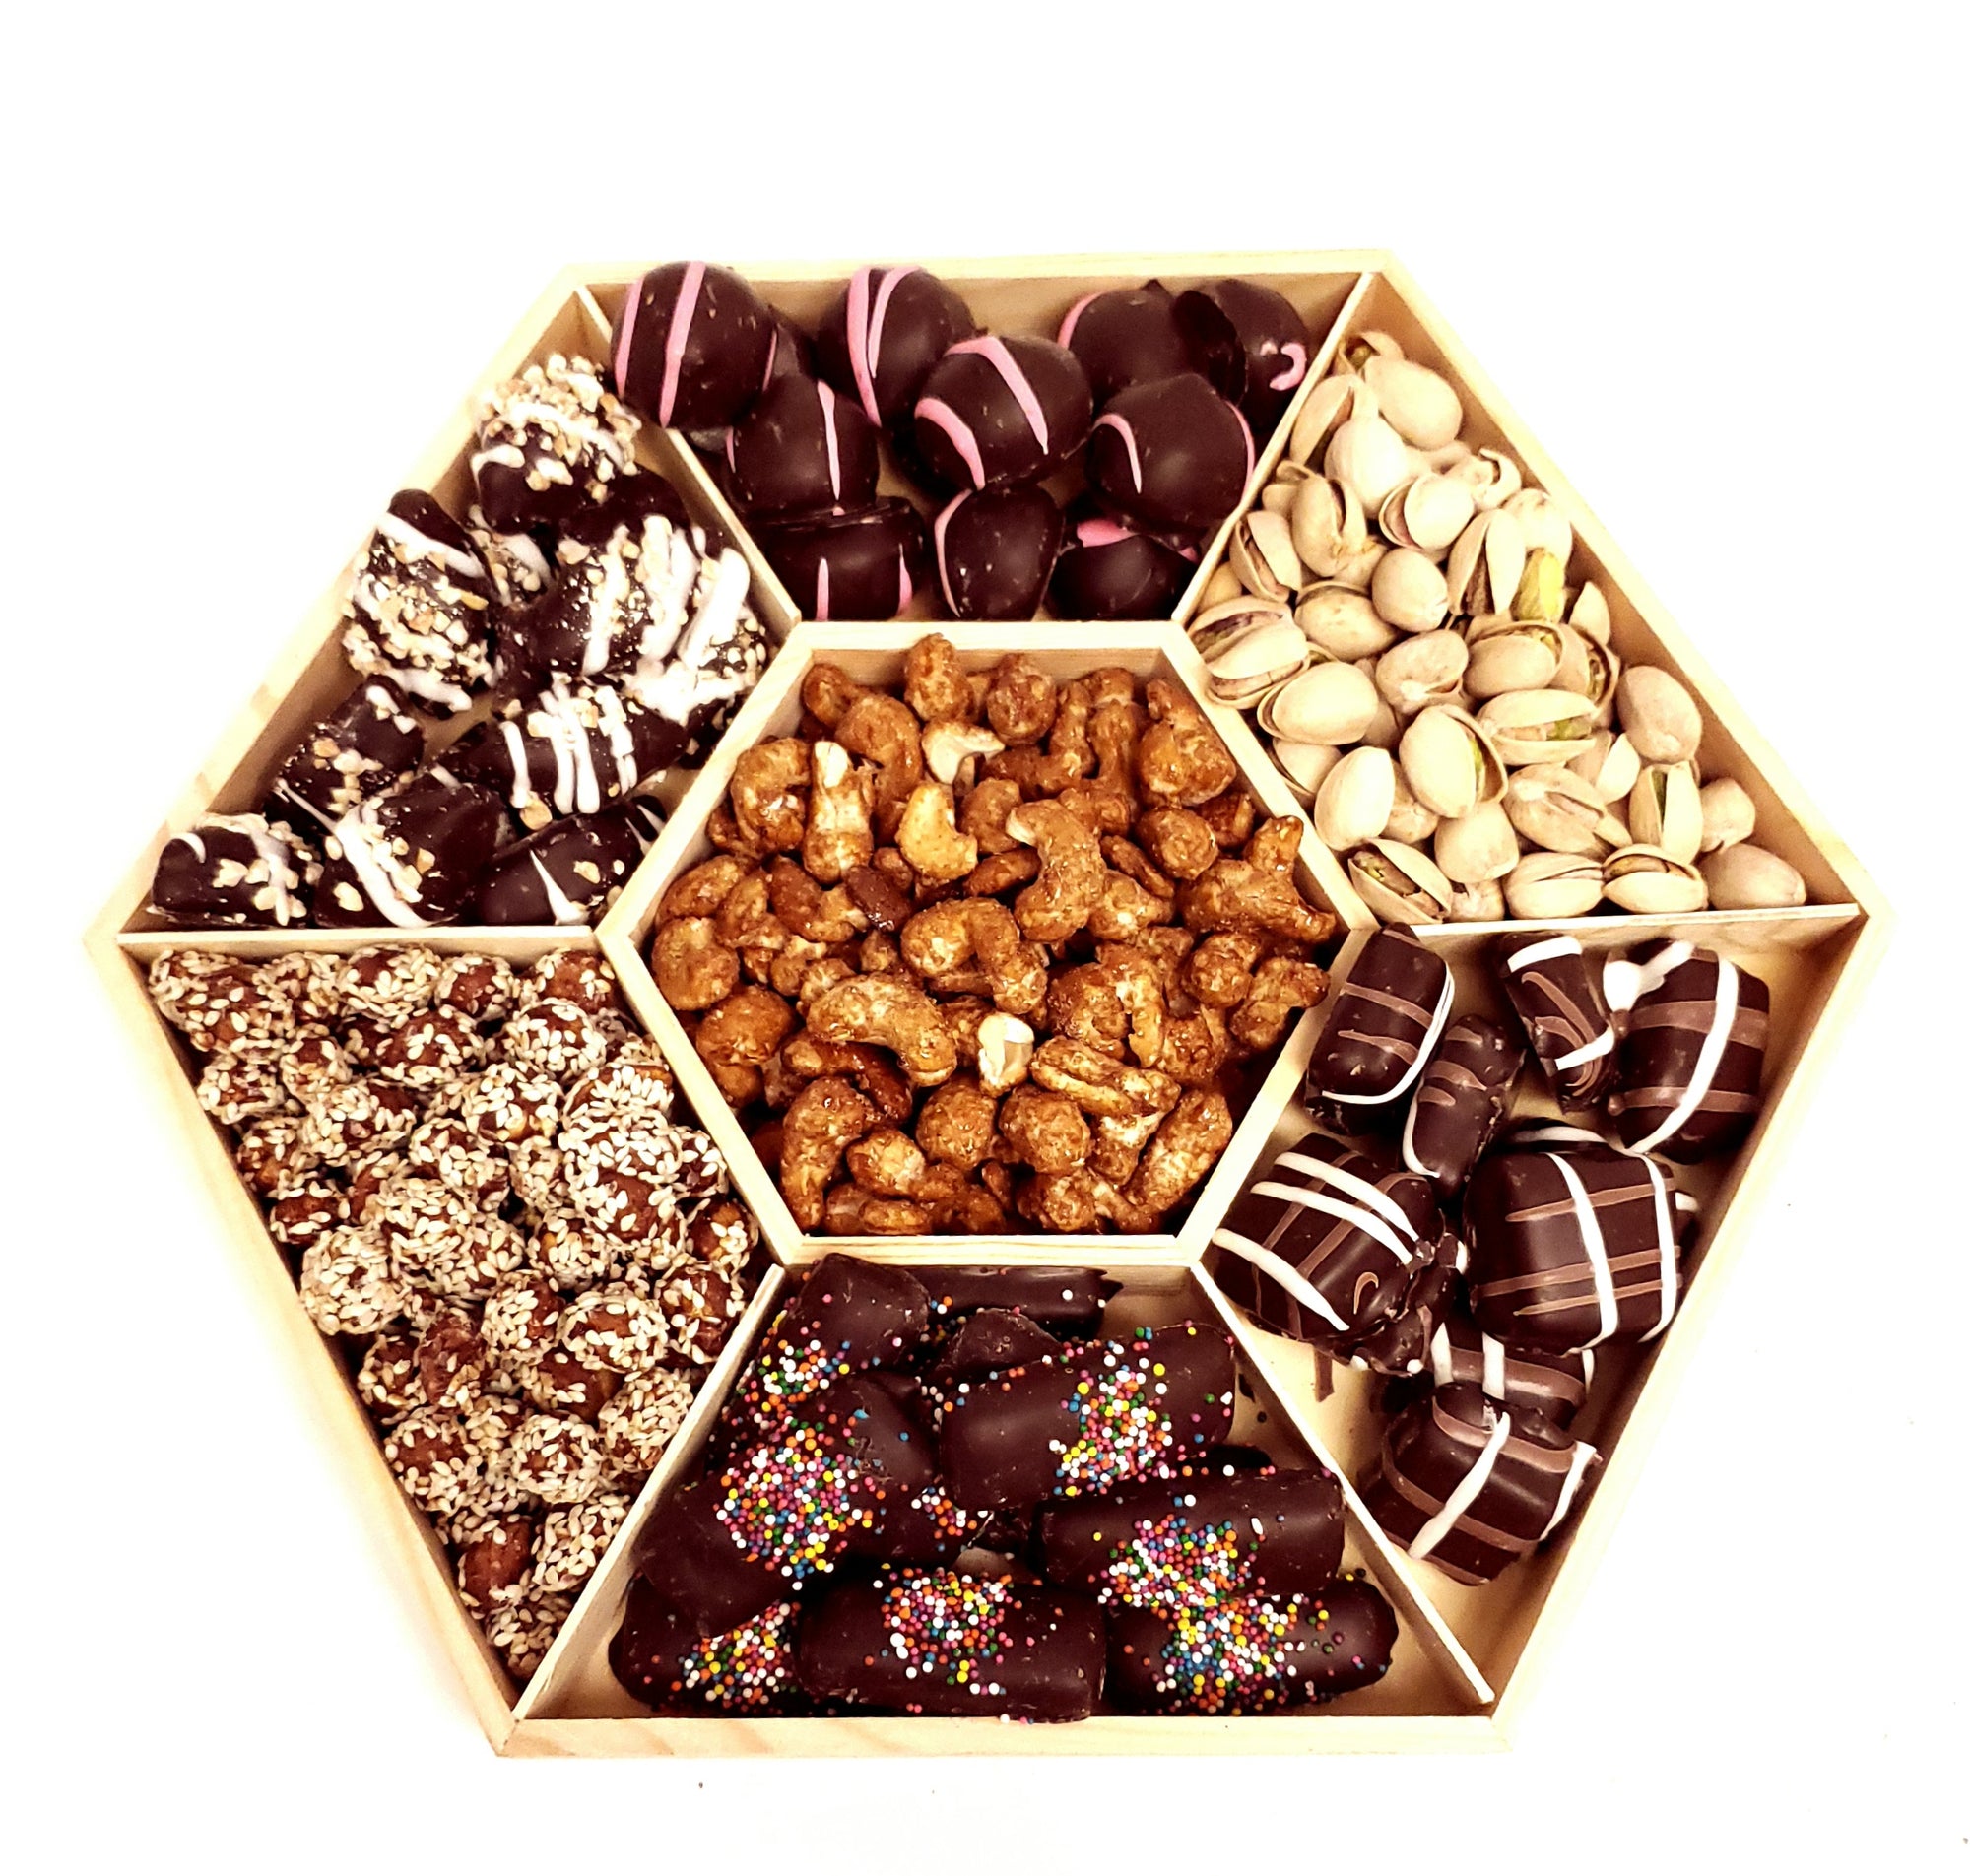 7 SECTION WOOD CHOCO NUTS